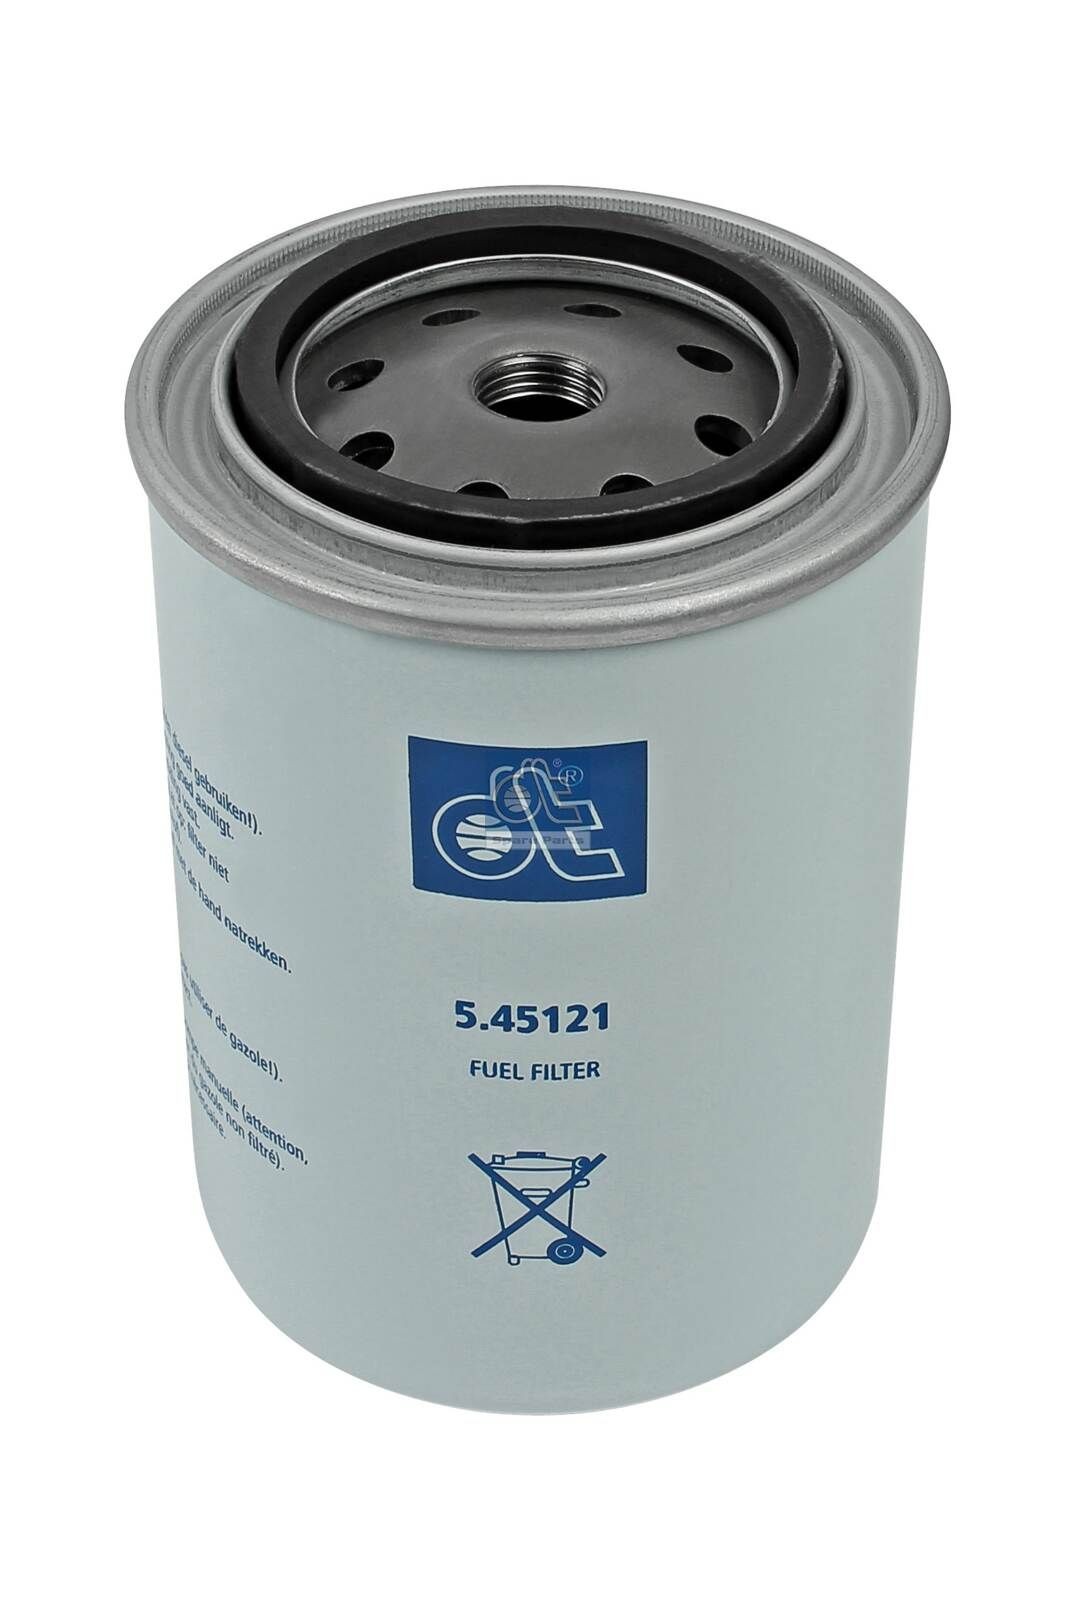 WDK 940/5 DT Spare Parts 5.45121 Fuel filter 000-092-83-01